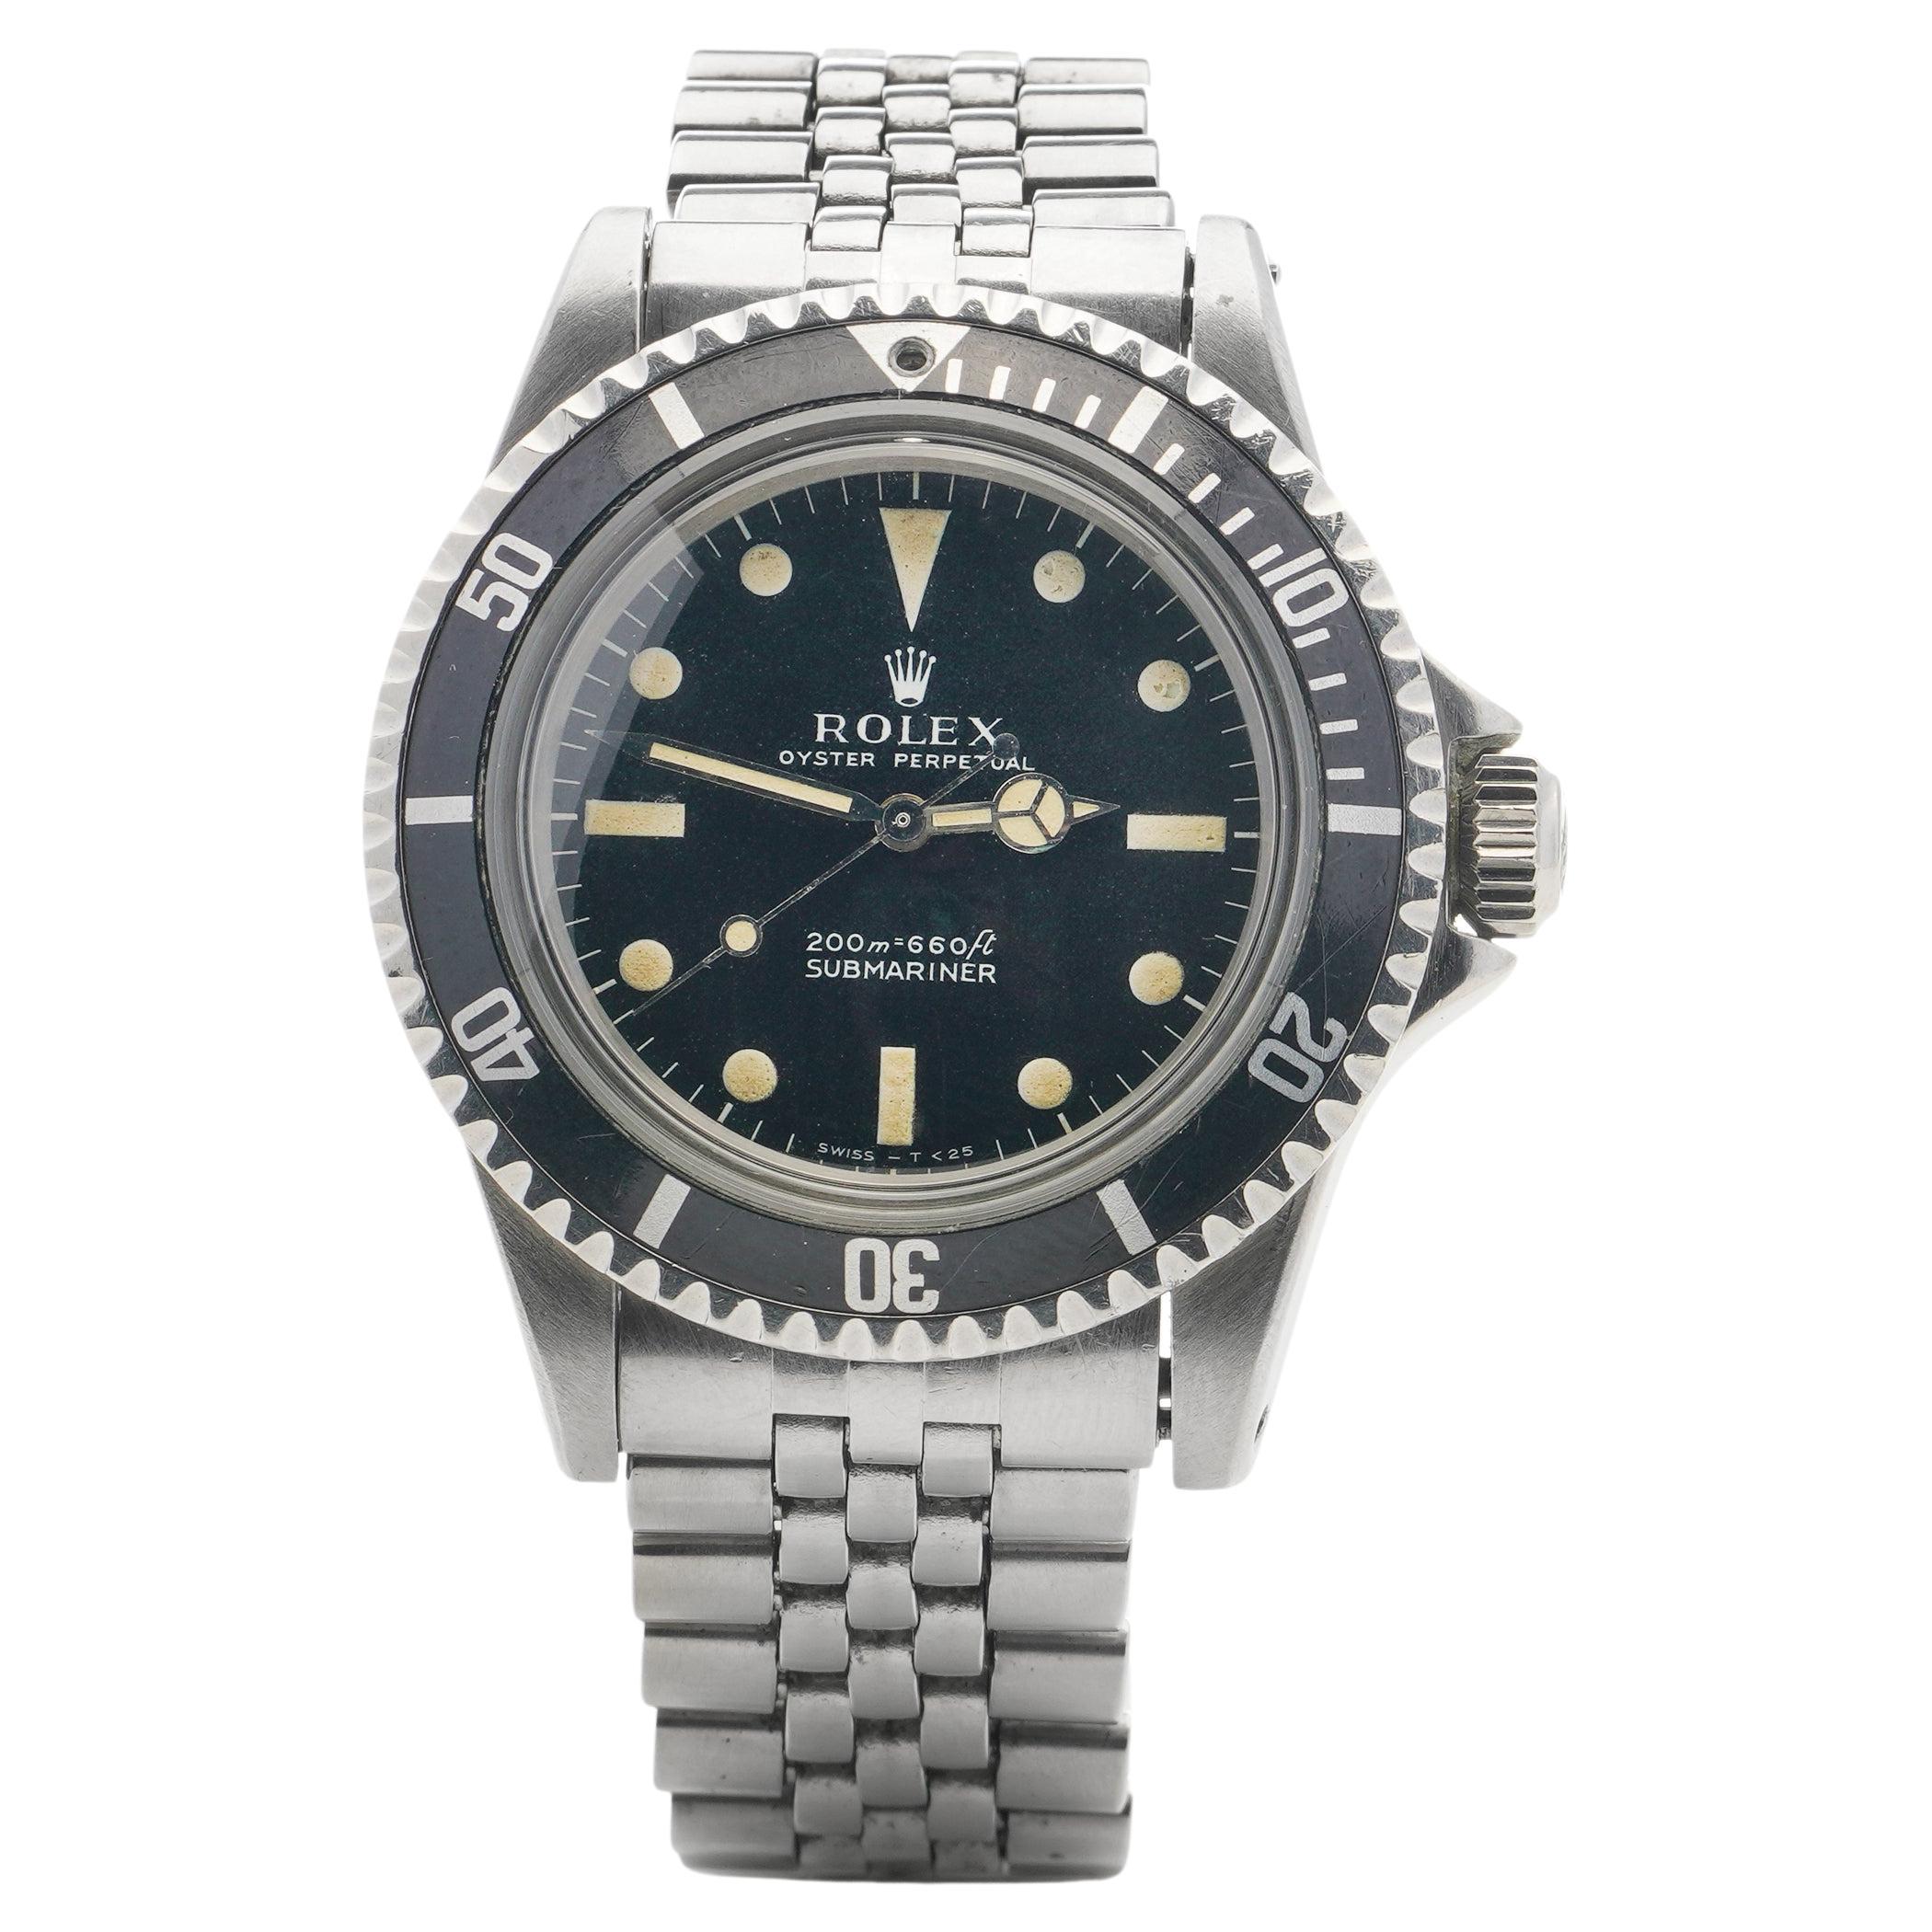 Rolex Oyster Perpetual Submariner, 5513, Stainless Steel Watch For Sale